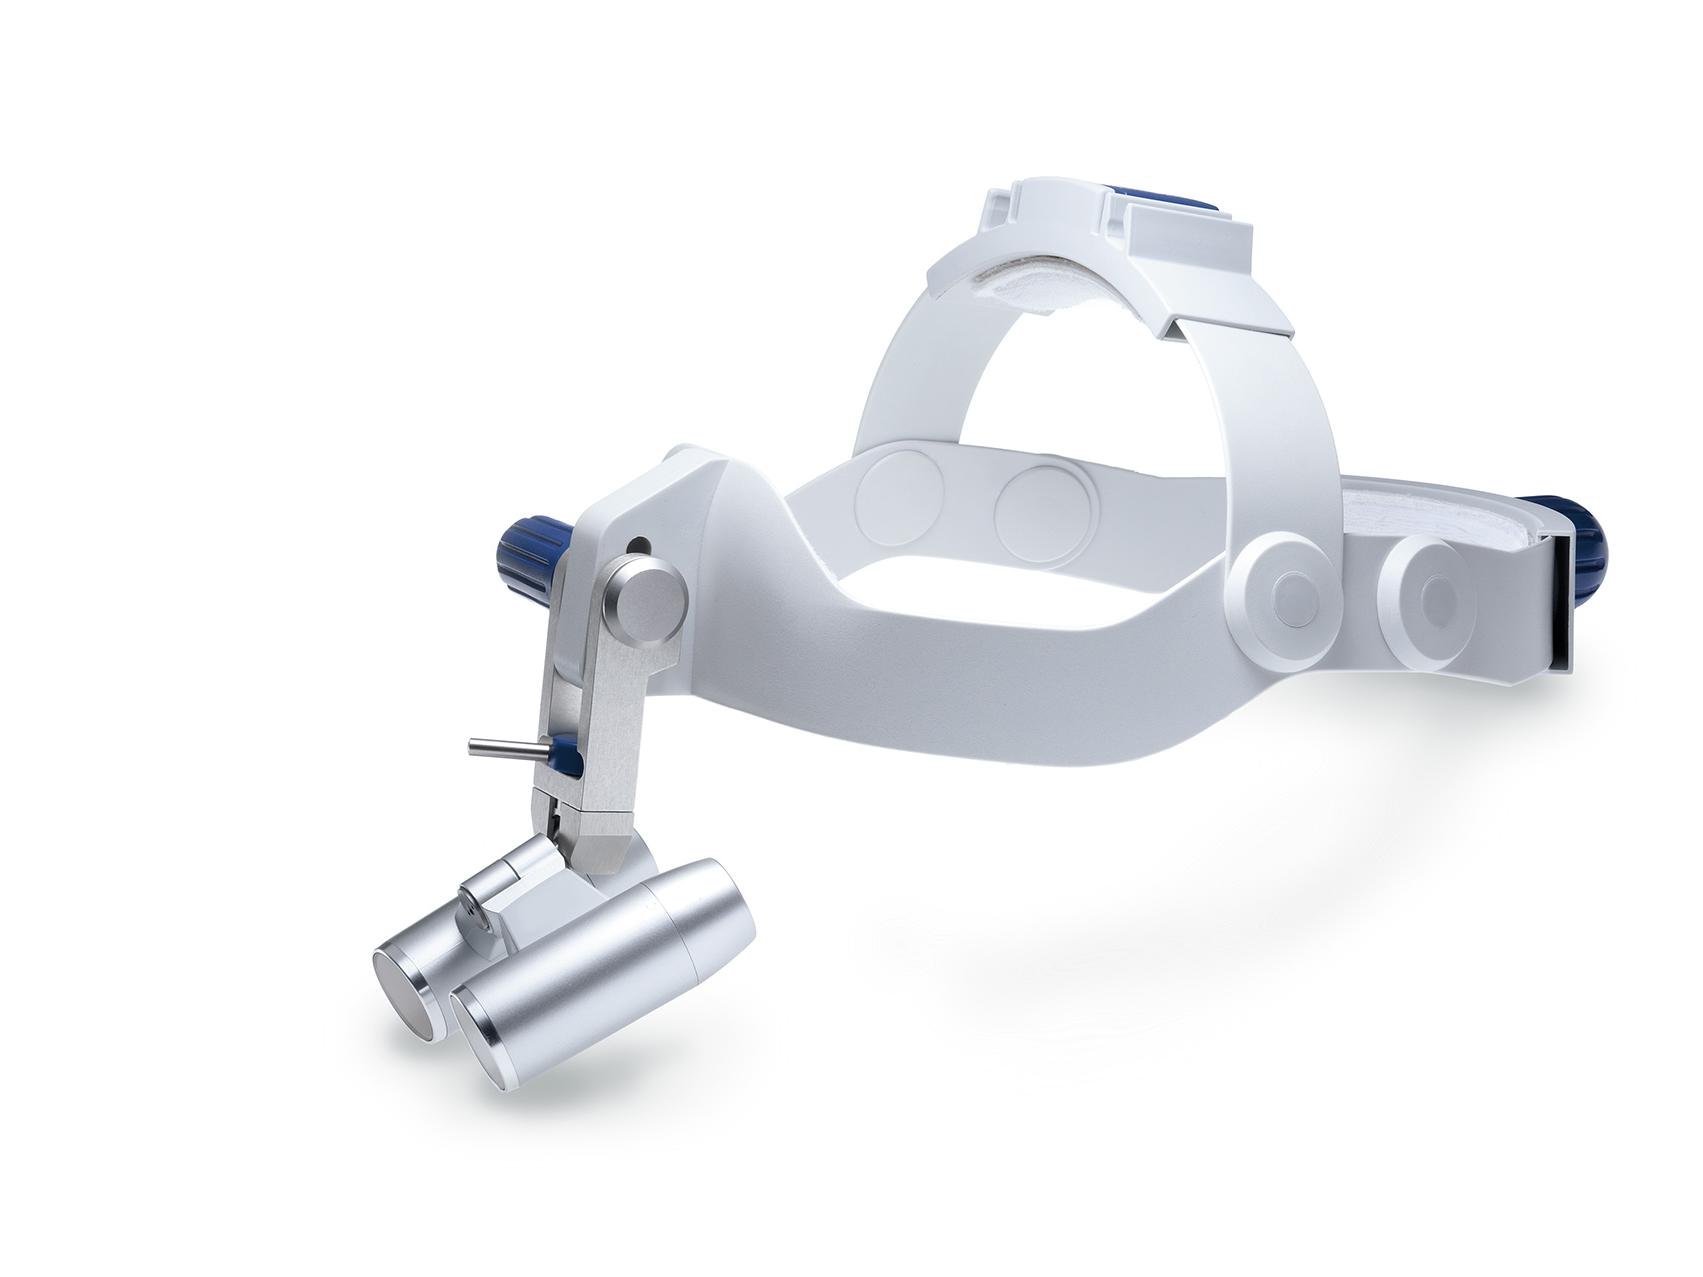 ZEISS Head-worn Loupes with adjustable headband. The teleloupe system is mounted via a swivelling attachment.